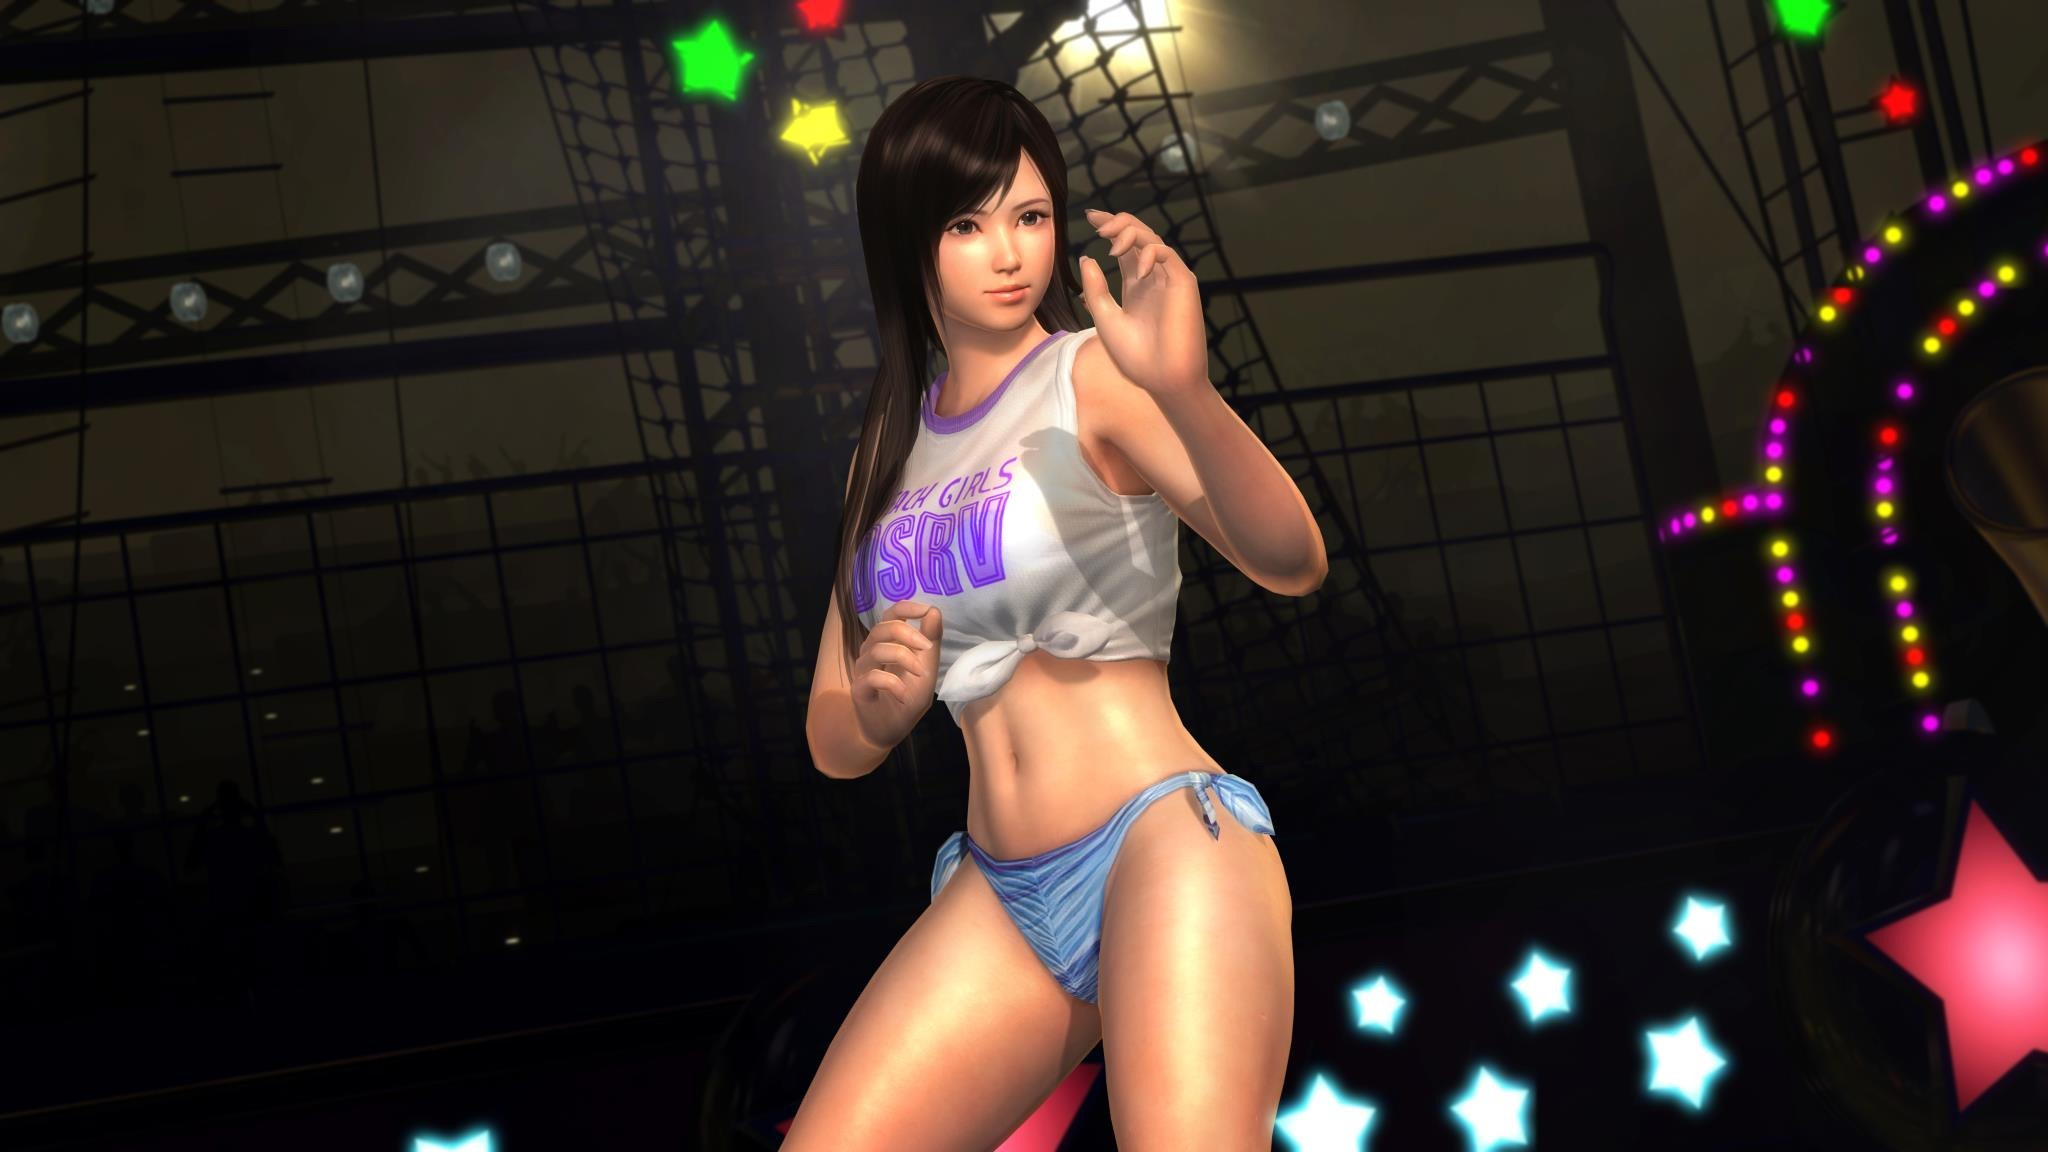 Dead Or Alive 5 Wallpapers Video Game Hq Dead Or Alive 5 Images, Photos, Reviews